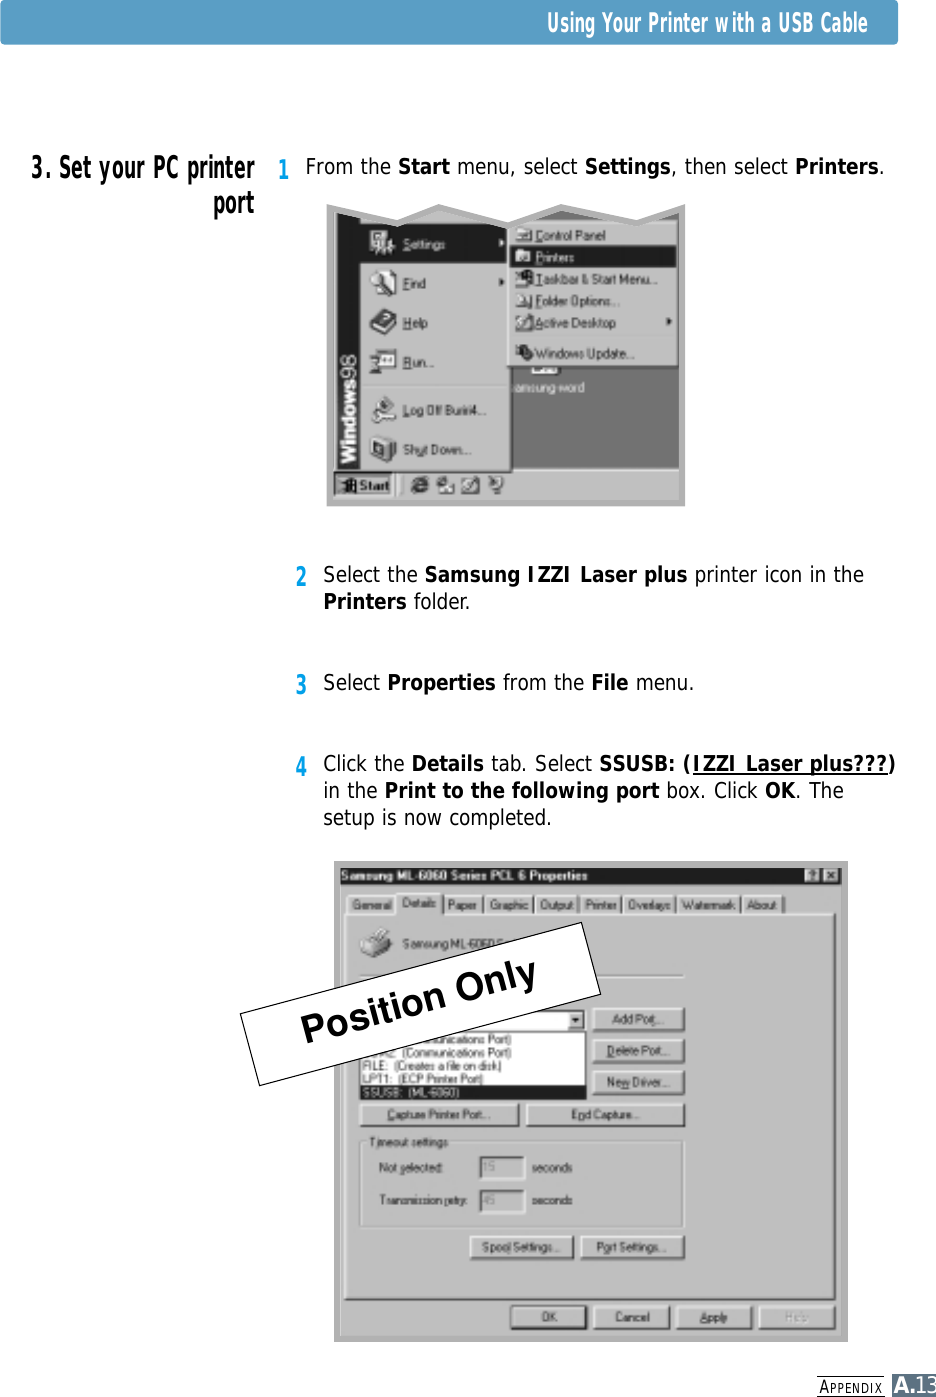 APPENDIXA.13Using Your Printer with a USB Cable1From the Start menu, select Settings, then select Printers.2Select the Samsung IZZI Laser plus printer icon in thePrinters folder.3Select Properties from the File menu.4Click the Details tab. Select SSUSB: (IZZI Laser plus???)in the Print to the following port box. Click OK. Thesetup is now completed.3. Set your PC printerportPosition Only